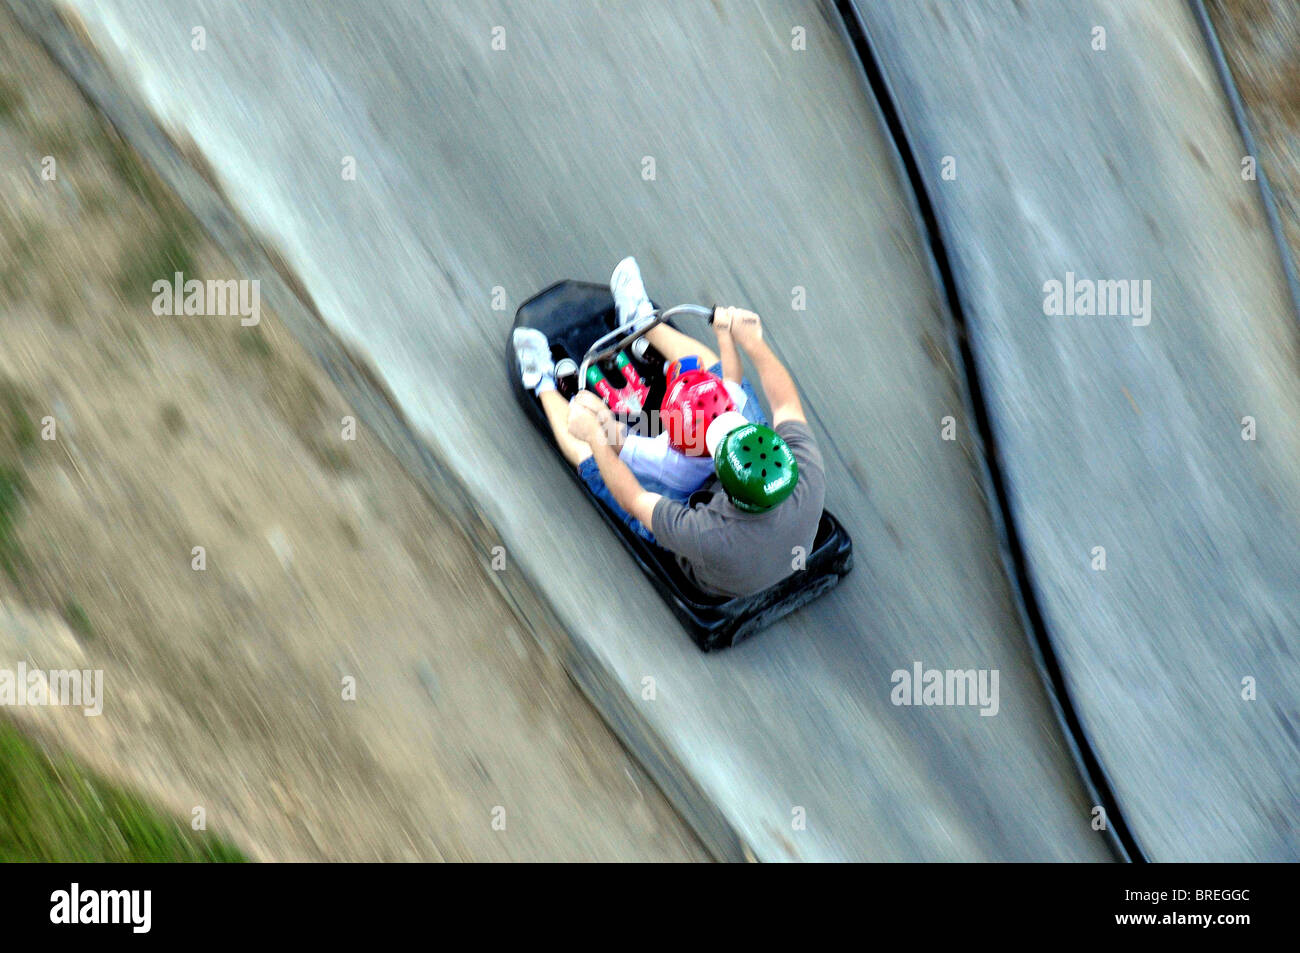 New Zealand, South Island, Queenstown luge Stock Photo